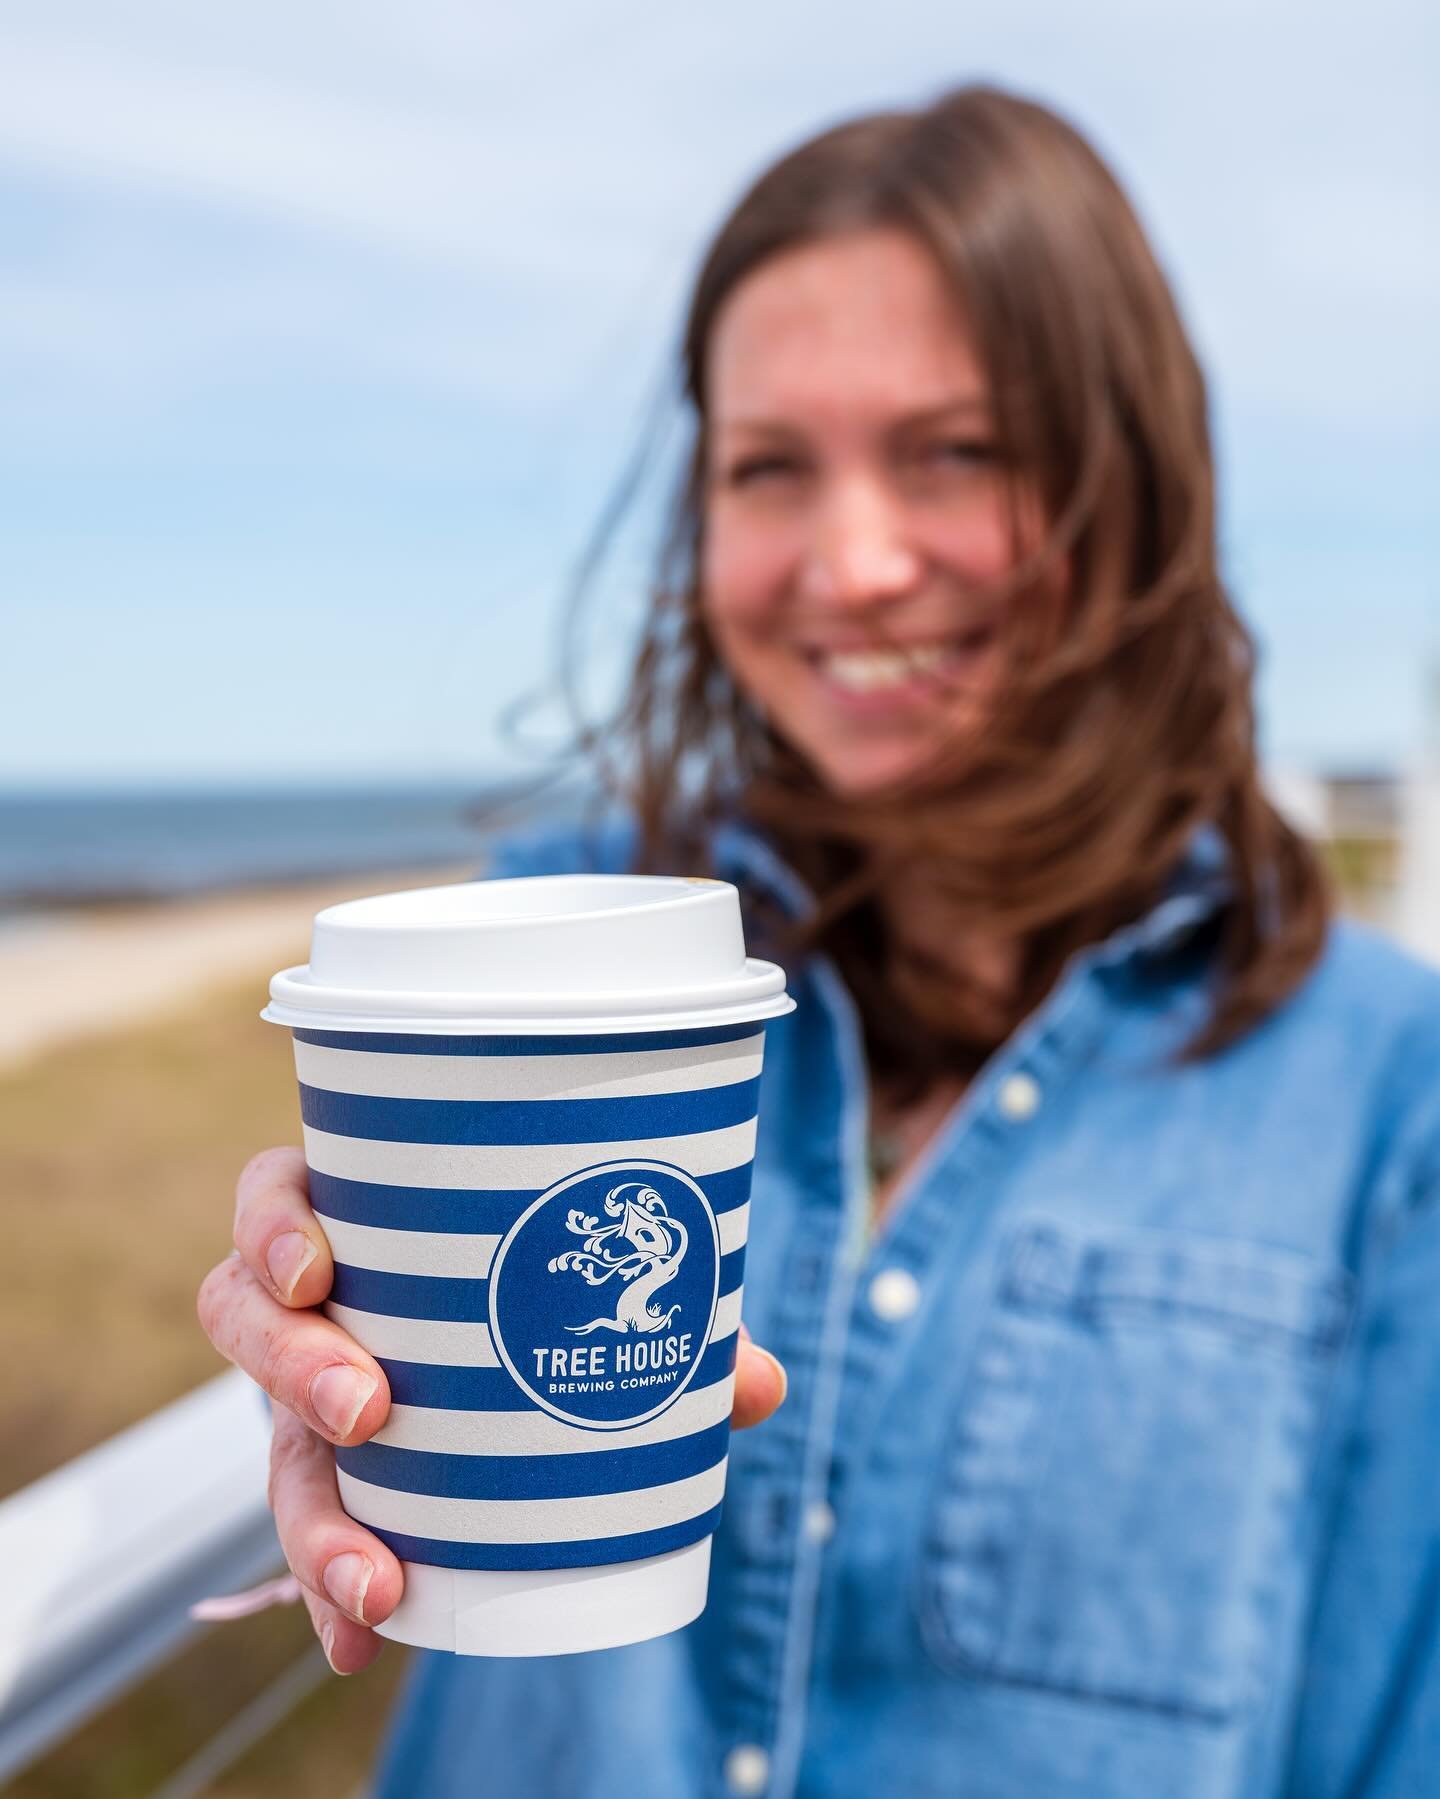 There&rsquo;s just something about a hot coffee and a walk on the beach.

We now have hot coffee service in Sandwich Thursday - Sunday.

@treehousecoffeecompany 

#capecod